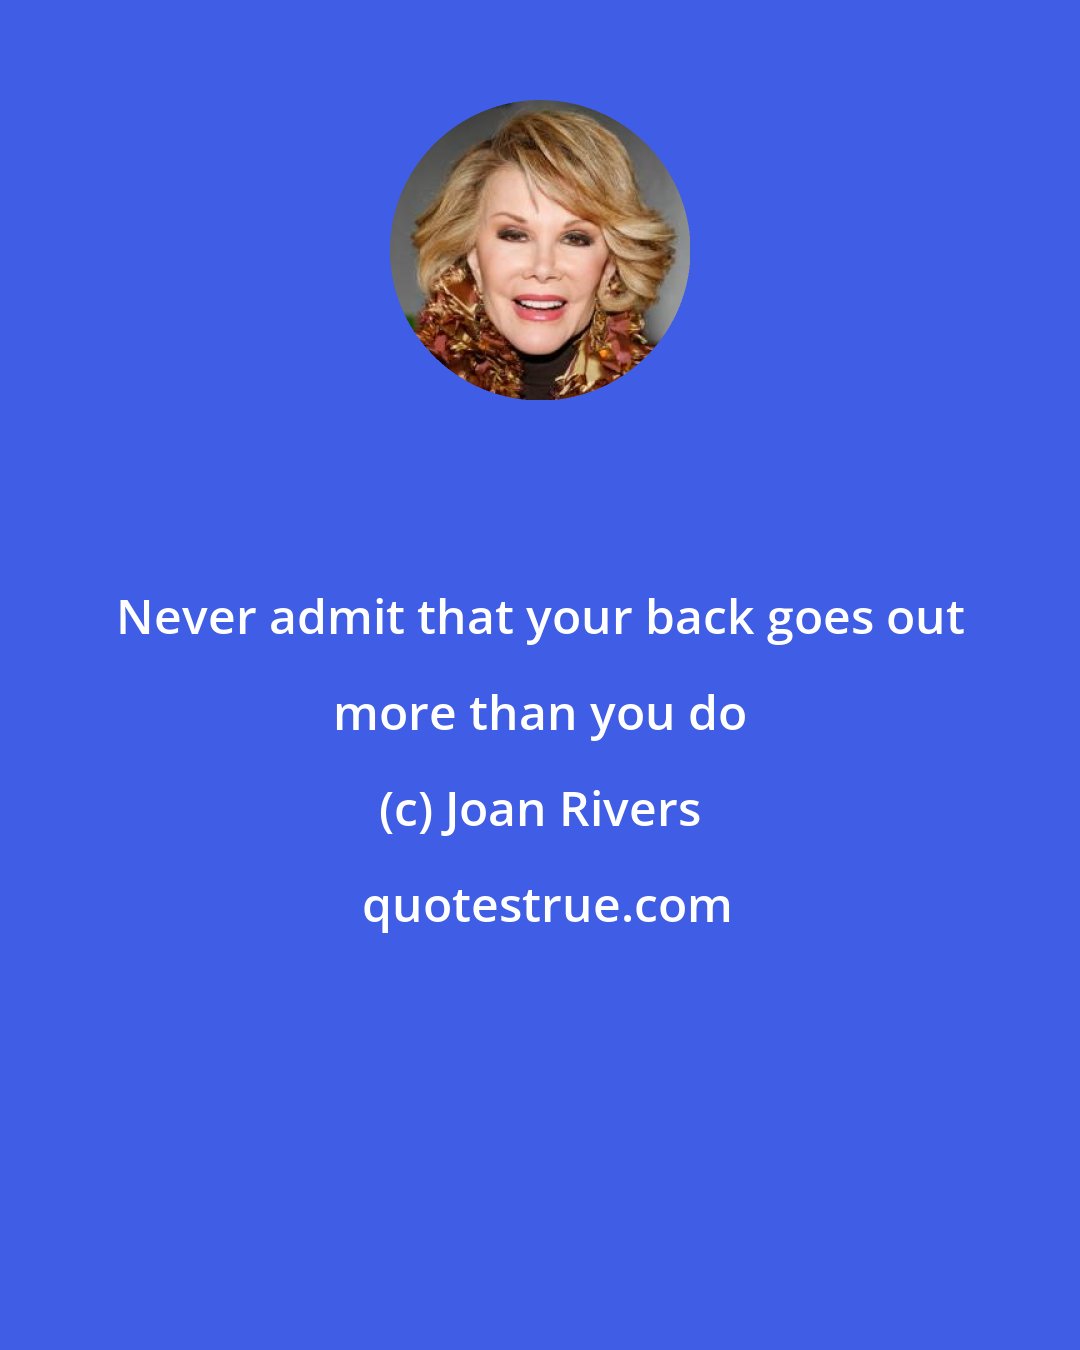 Joan Rivers: Never admit that your back goes out more than you do